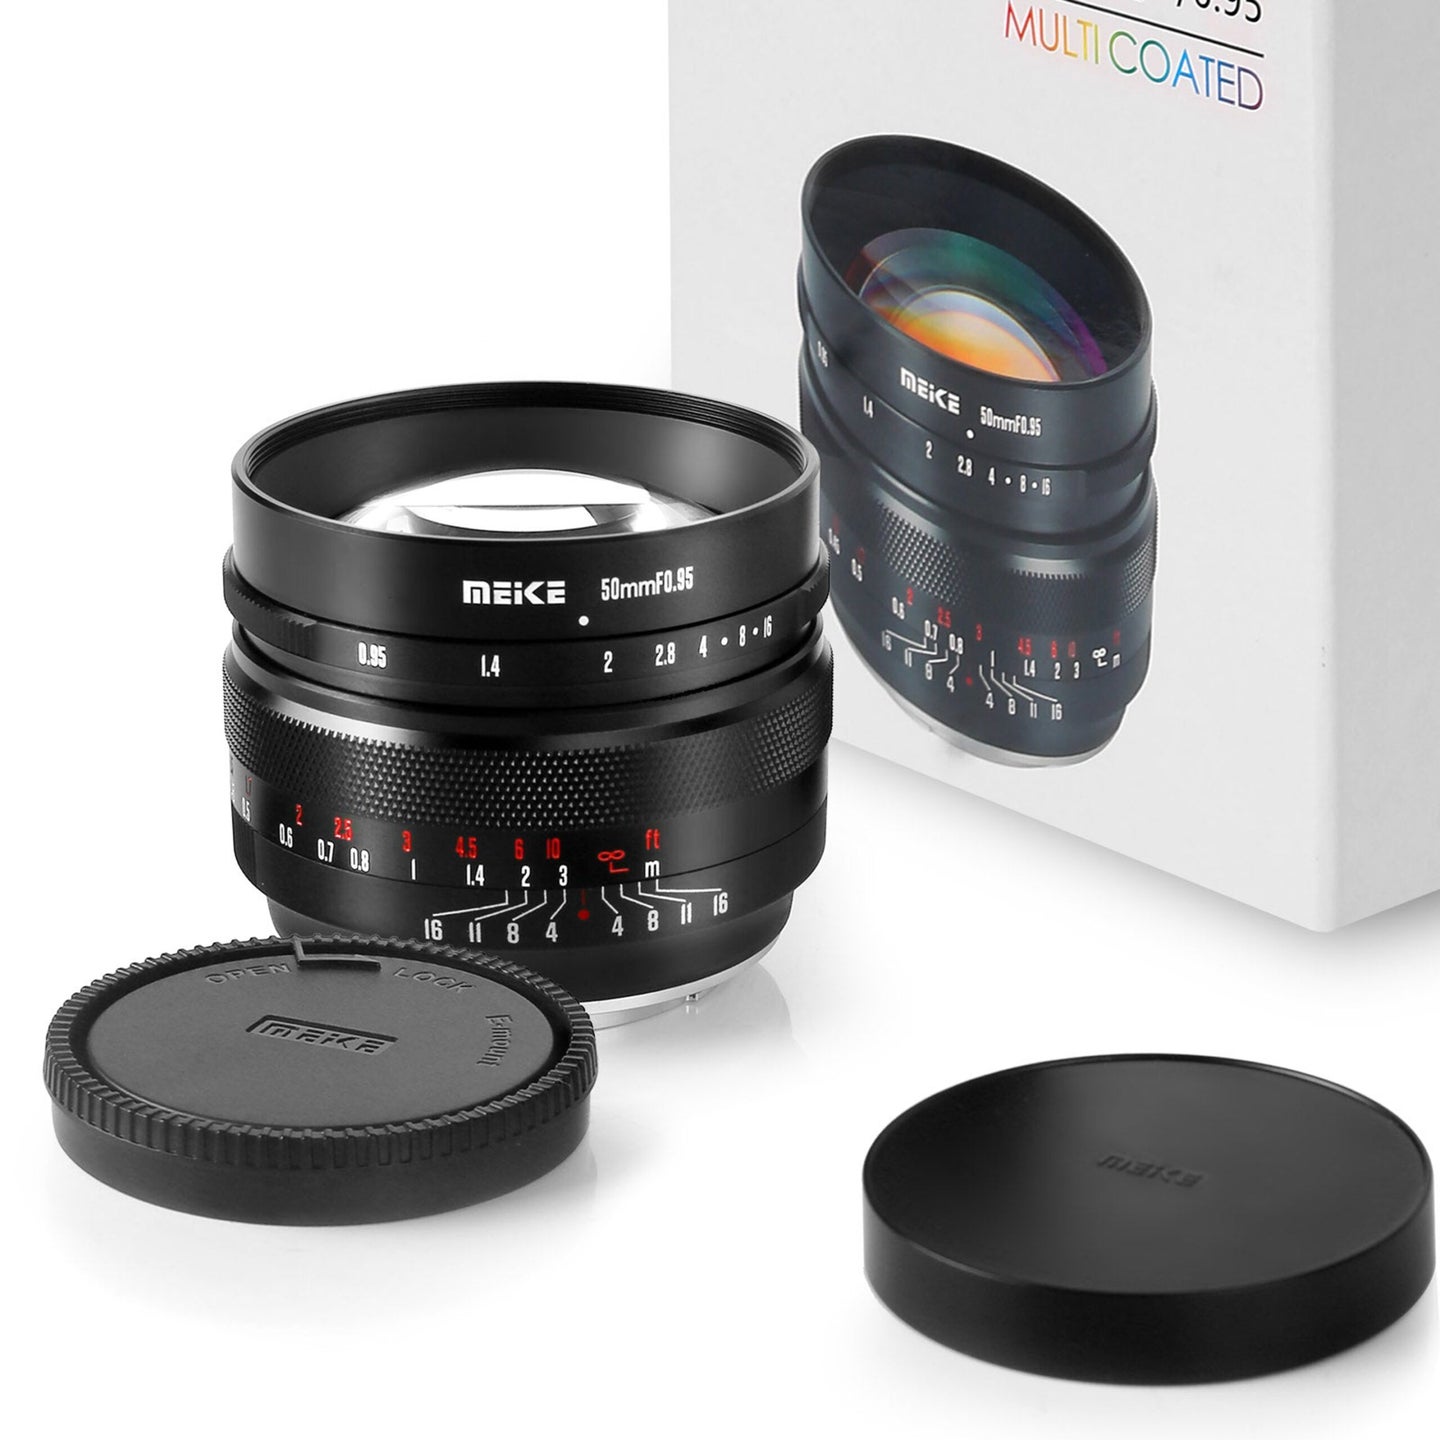 The new Meike 50mm f0.95 for APS-C mirrorless.